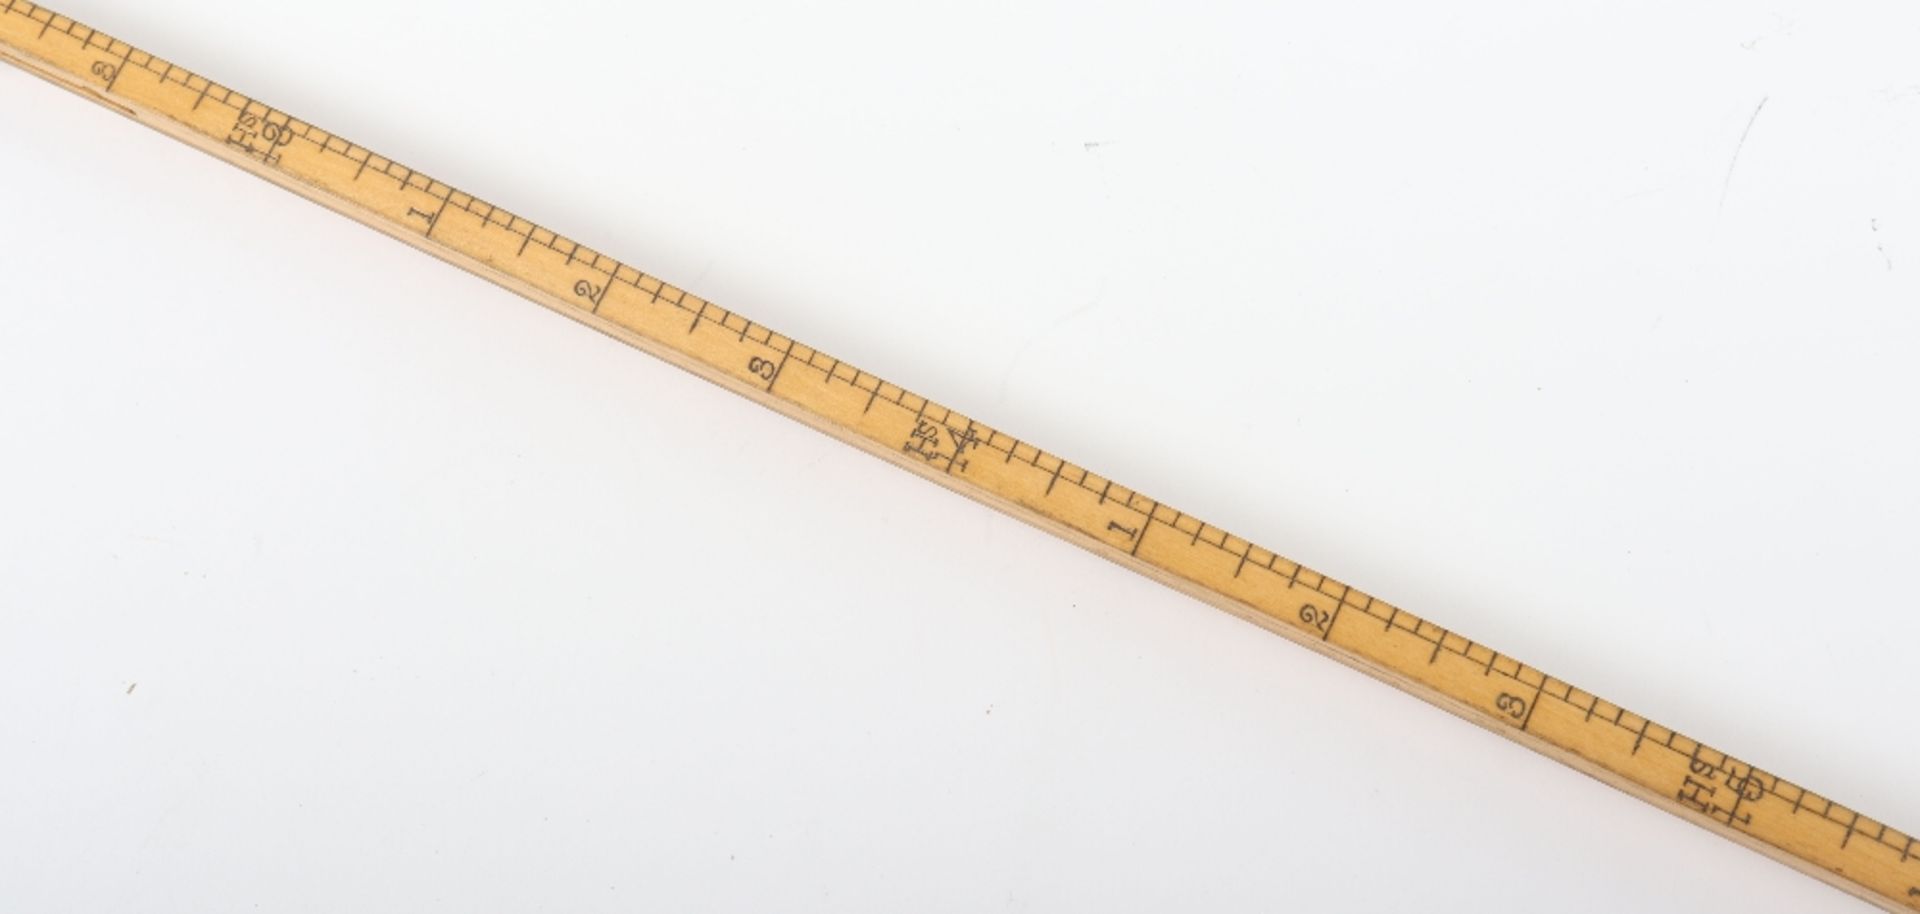 An Edwardian walking stick with spirit level (lacking liquid) and scaled ruler, with horn handle - Image 7 of 14